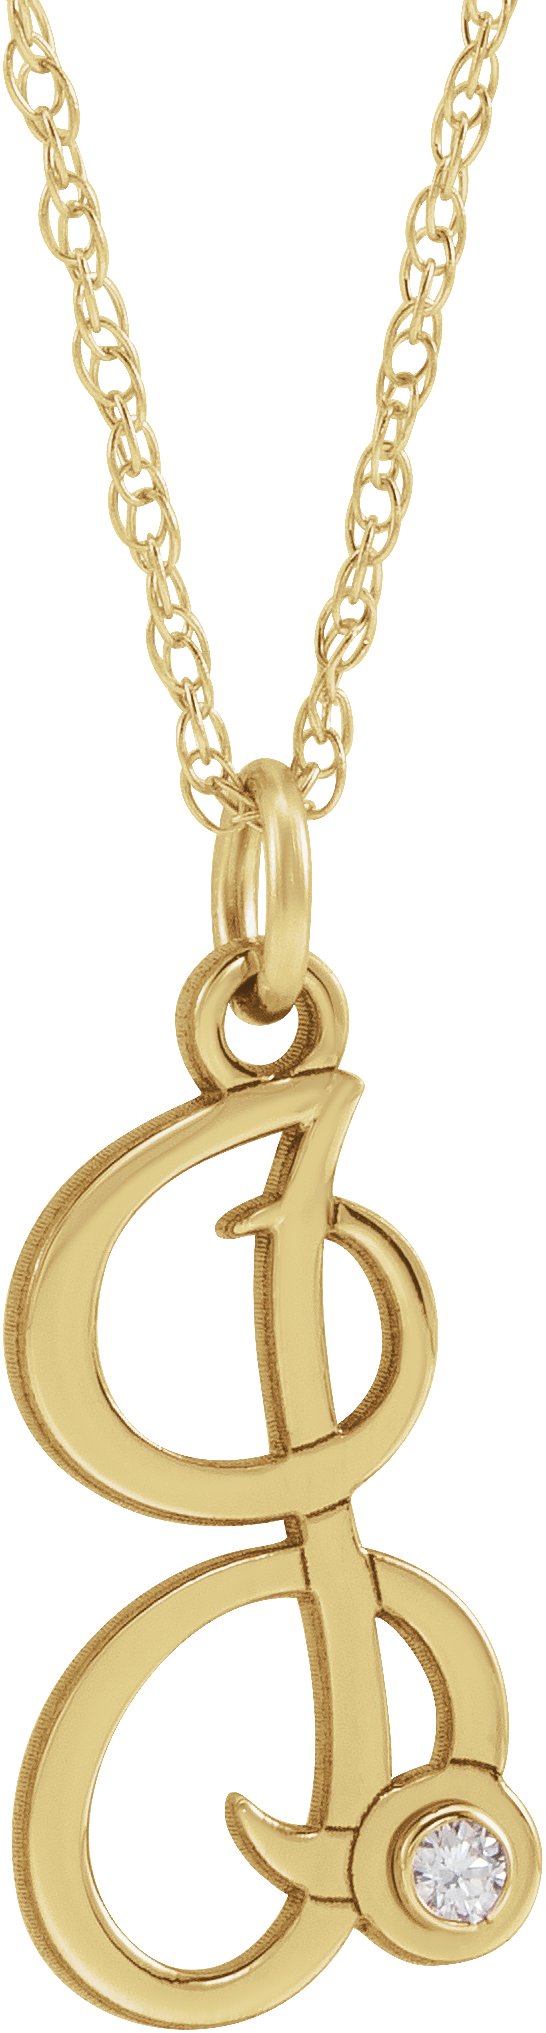 14K Yellow Gold-Plated .02 CT Diamond Script Initial I 16-18" Necklace